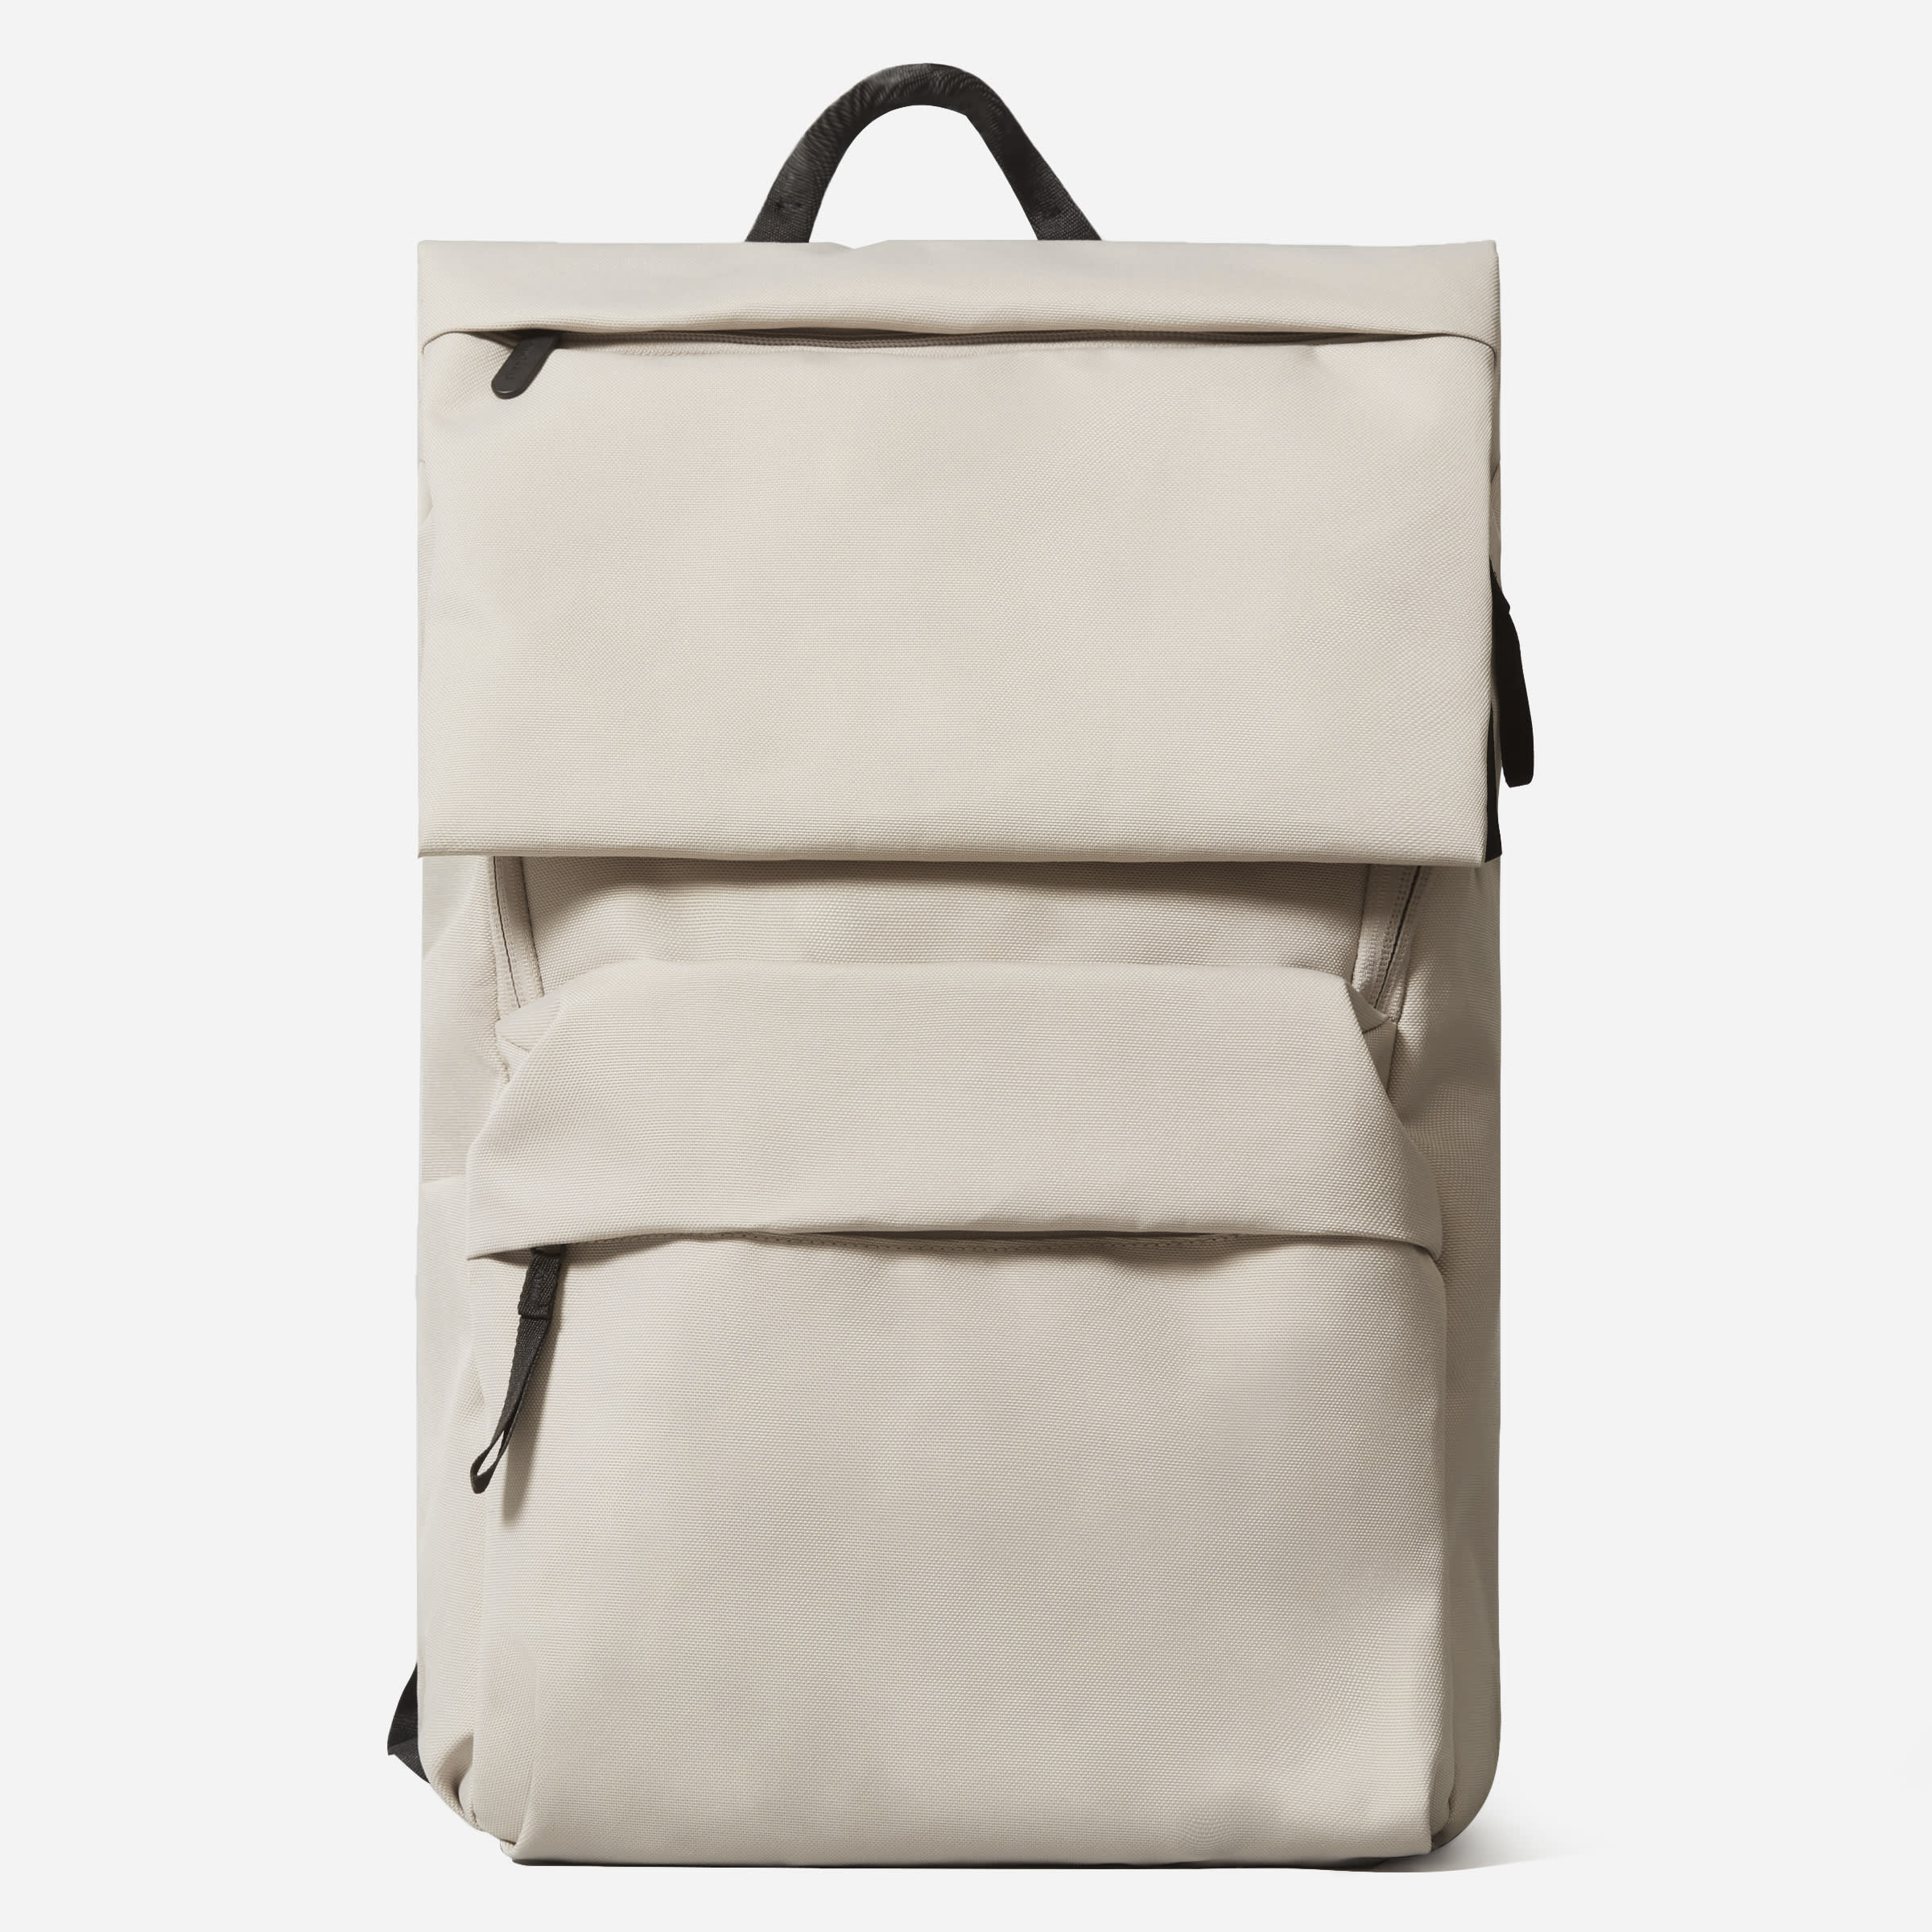 Everlane The ReNew 15 Inch Transit Backpack